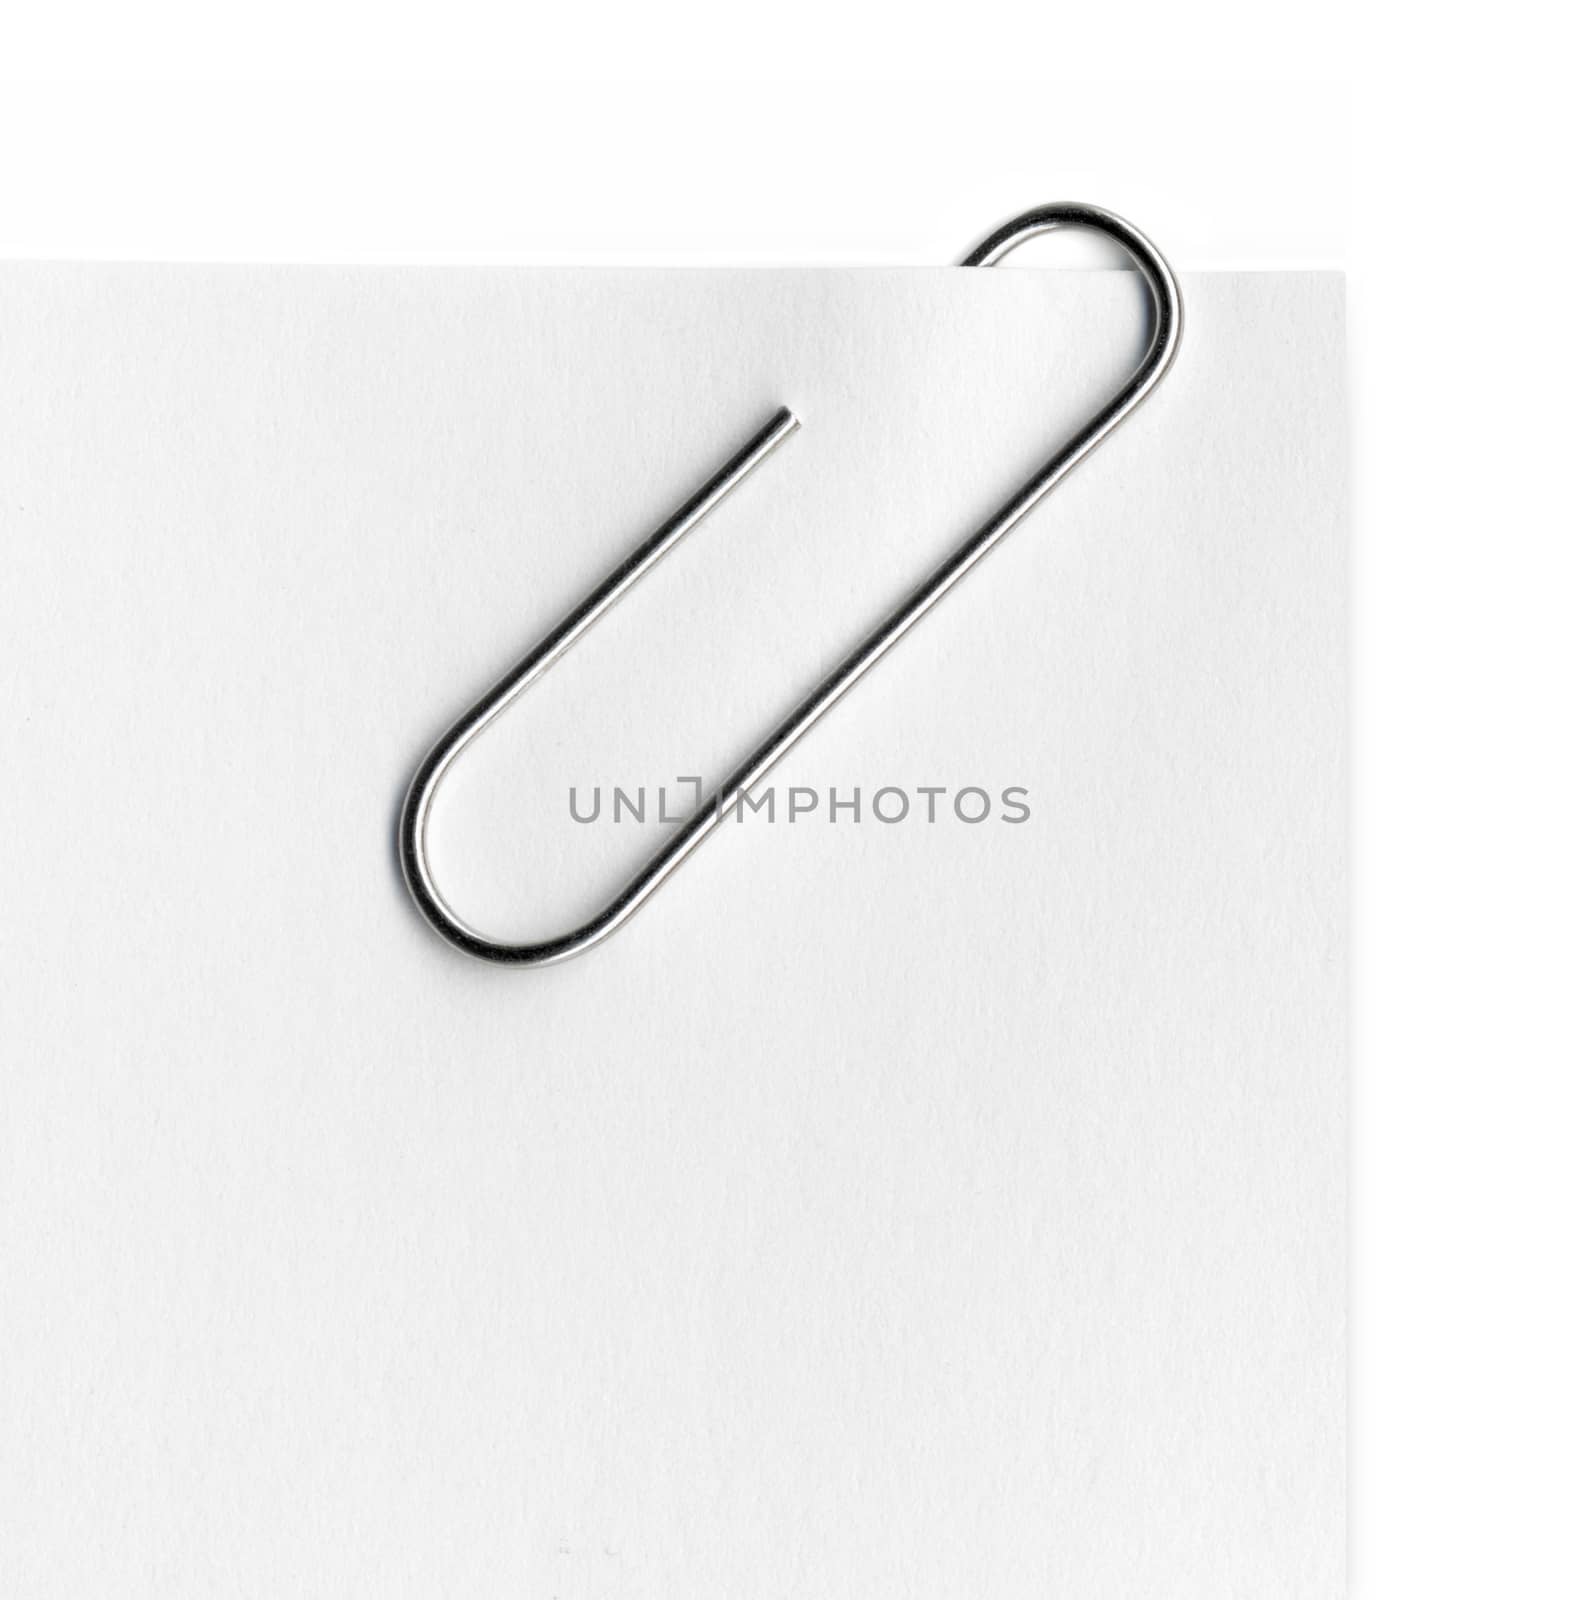 Scanned metal paper clip and paper on white background.